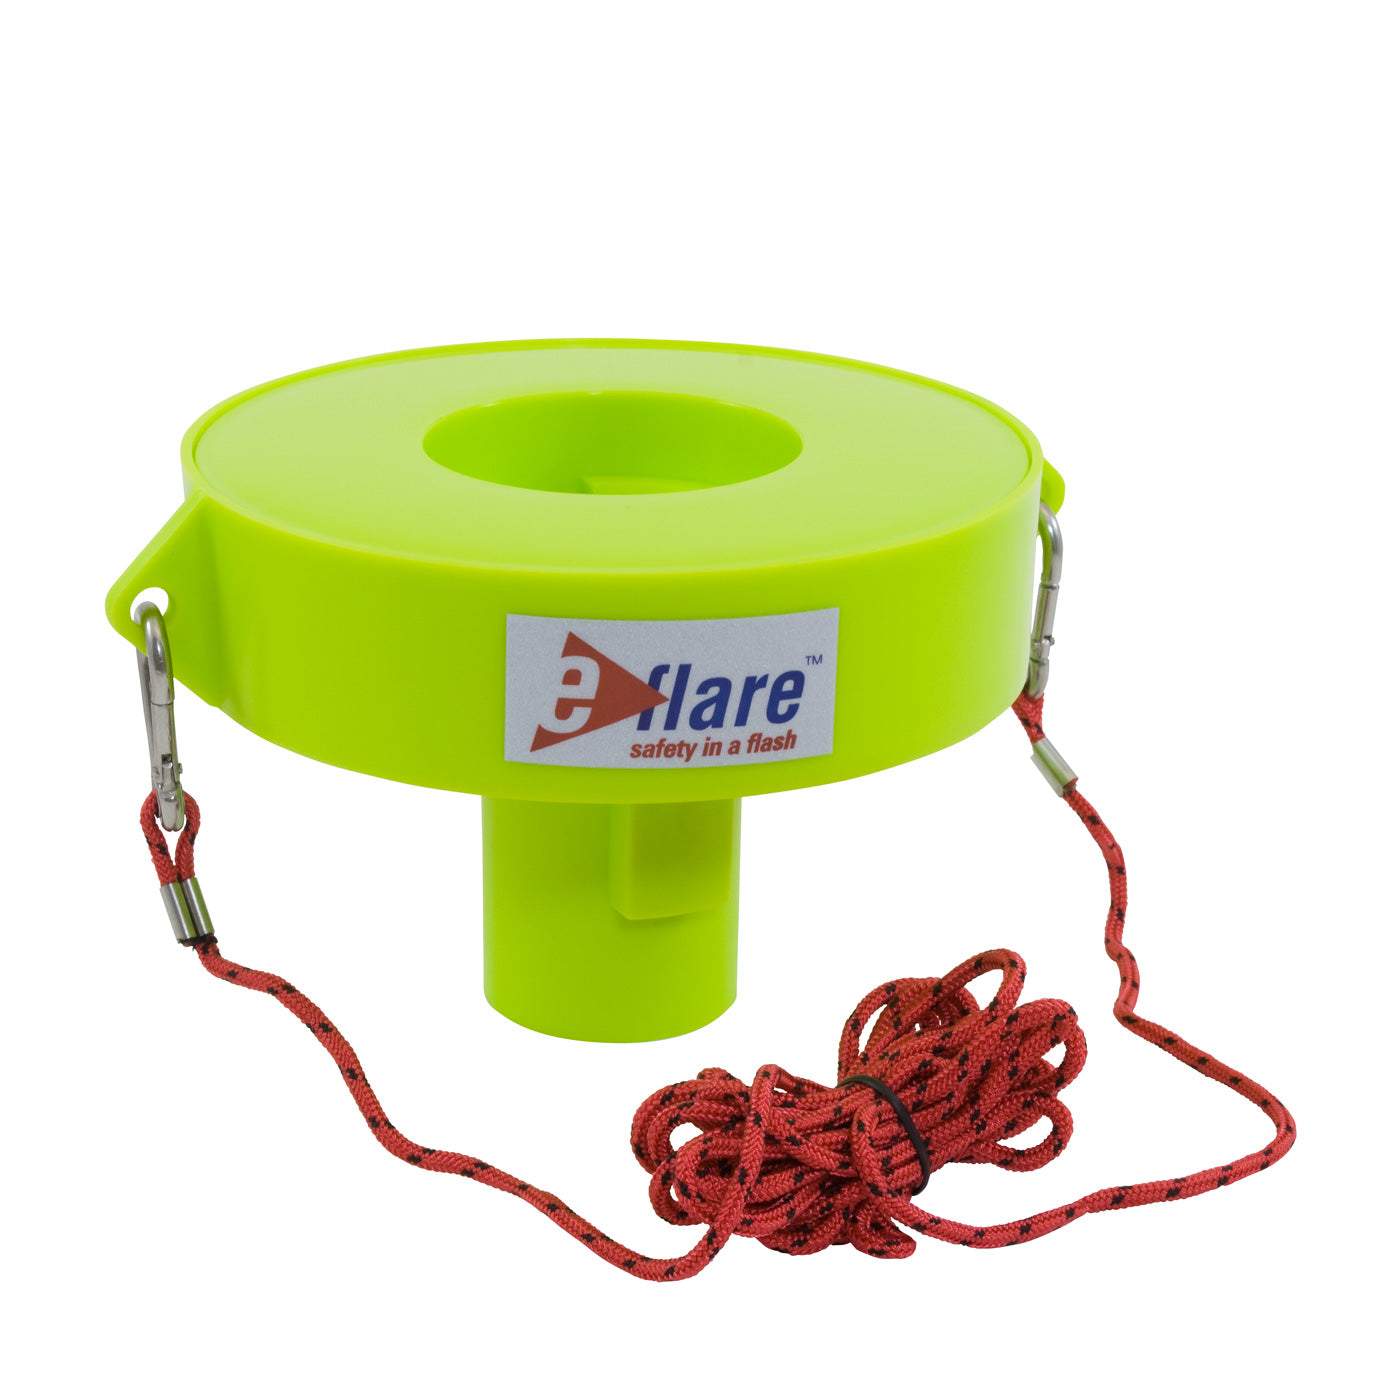 Protective Industrial Products-E-flare Flotation Collar